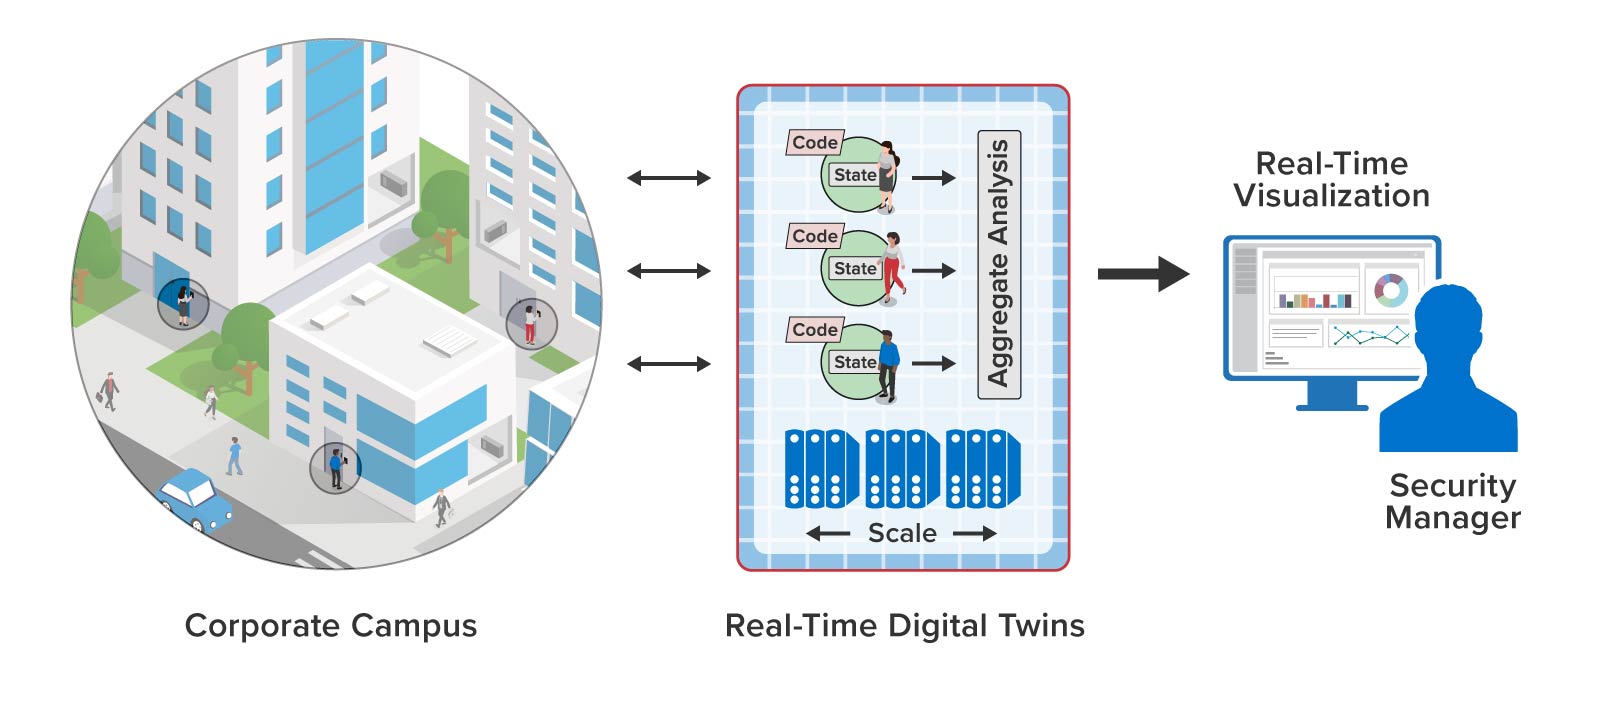 Key card access control using real-time digital twins for authorization